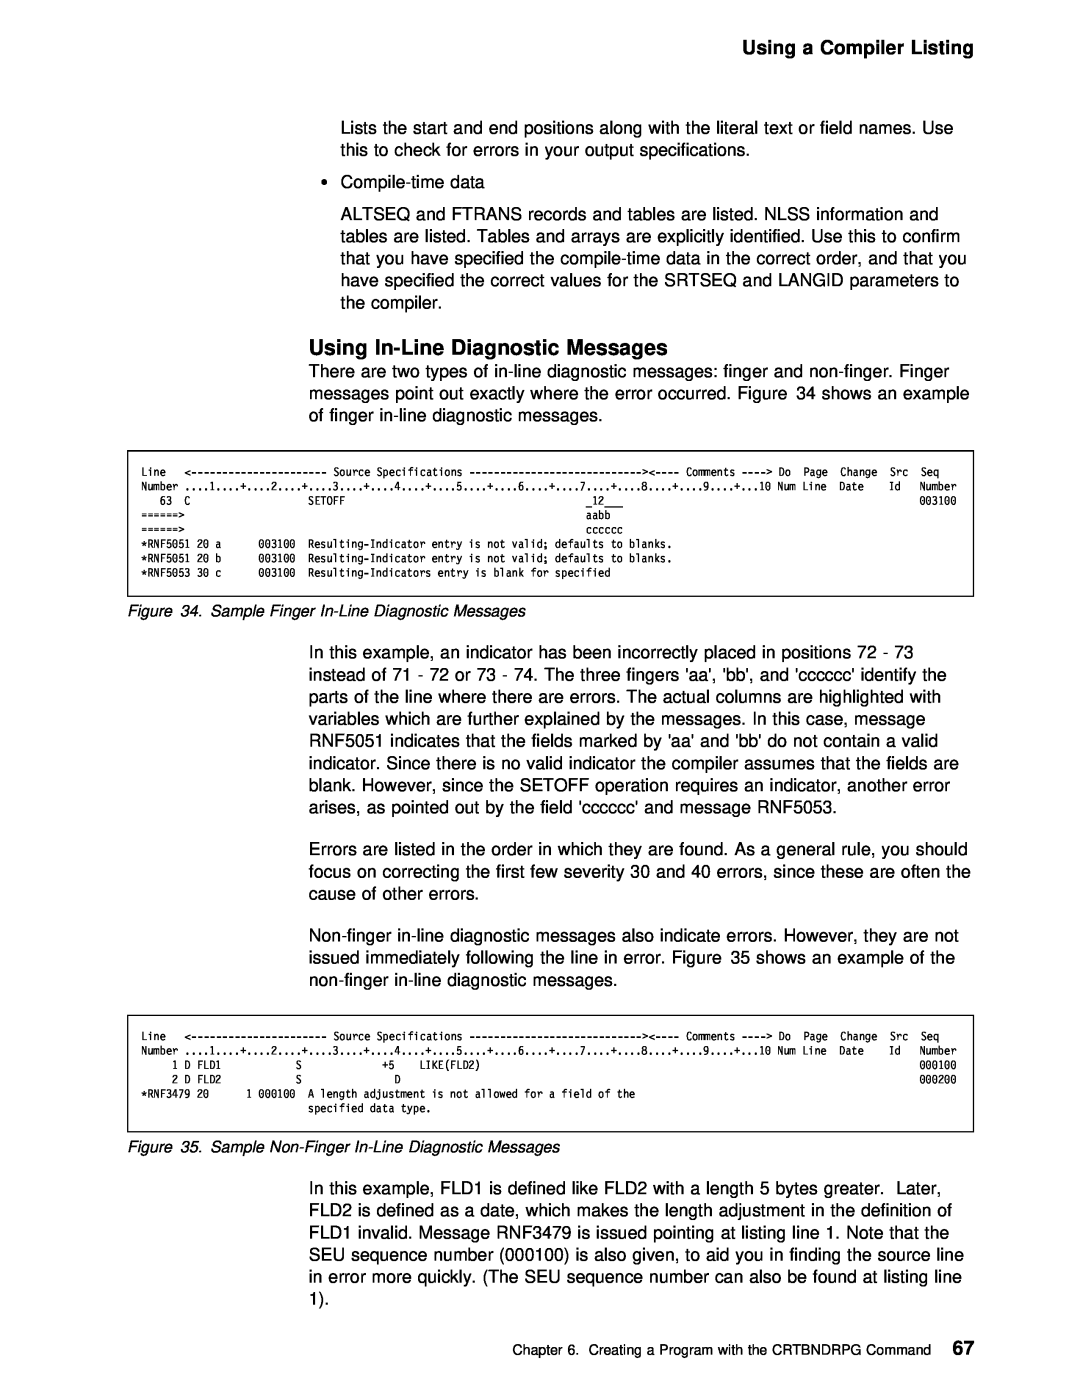 IBM AS/400 manual Using In-Line Diagnostic Messages, Using a, Compiler Listing 